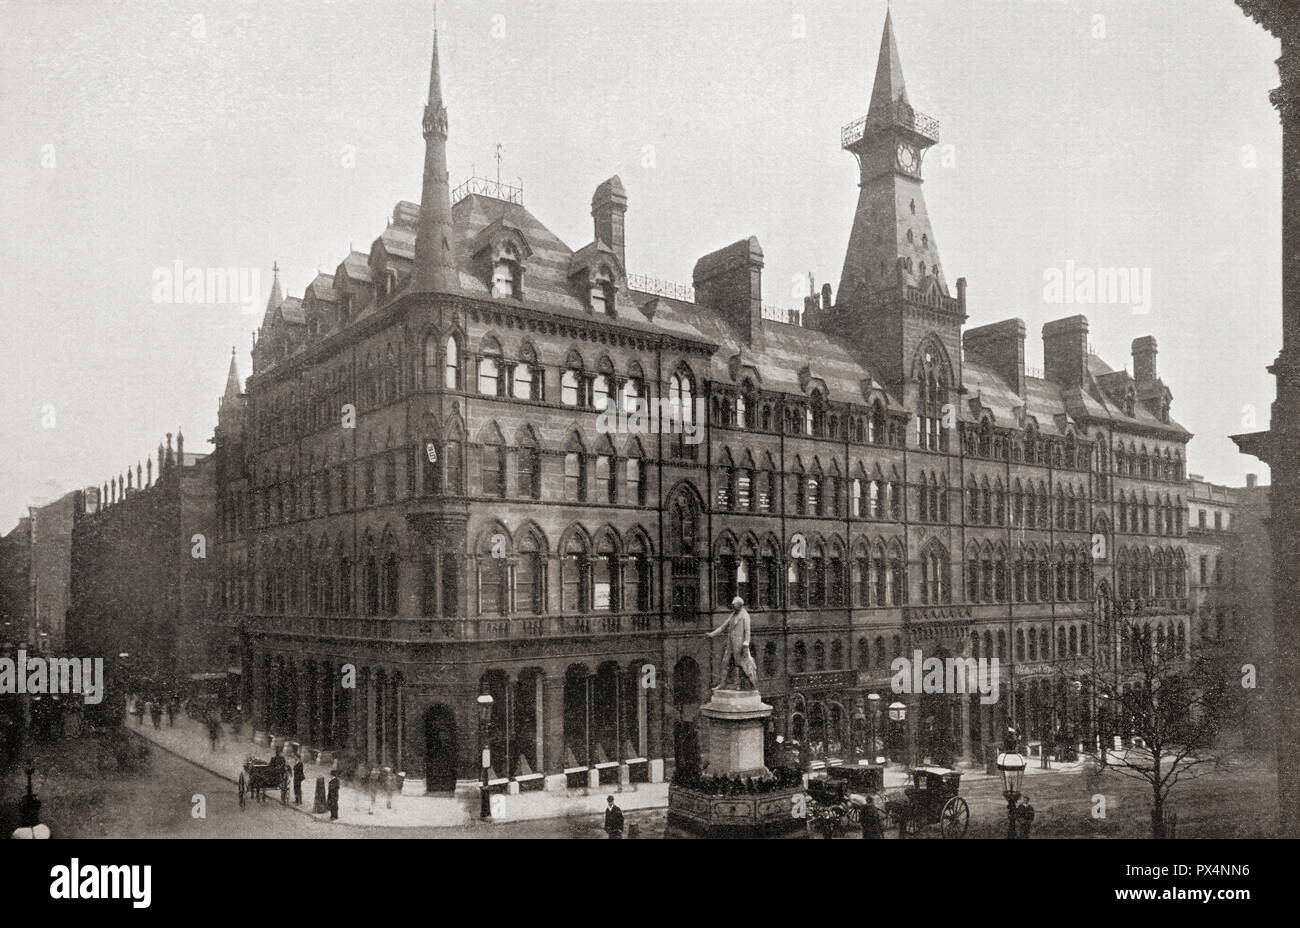 New Exchange Building Birmingham, England, opened in 1865.  From The Business Encyclopedia and Legal Adviser, published 1920. Stock Photo